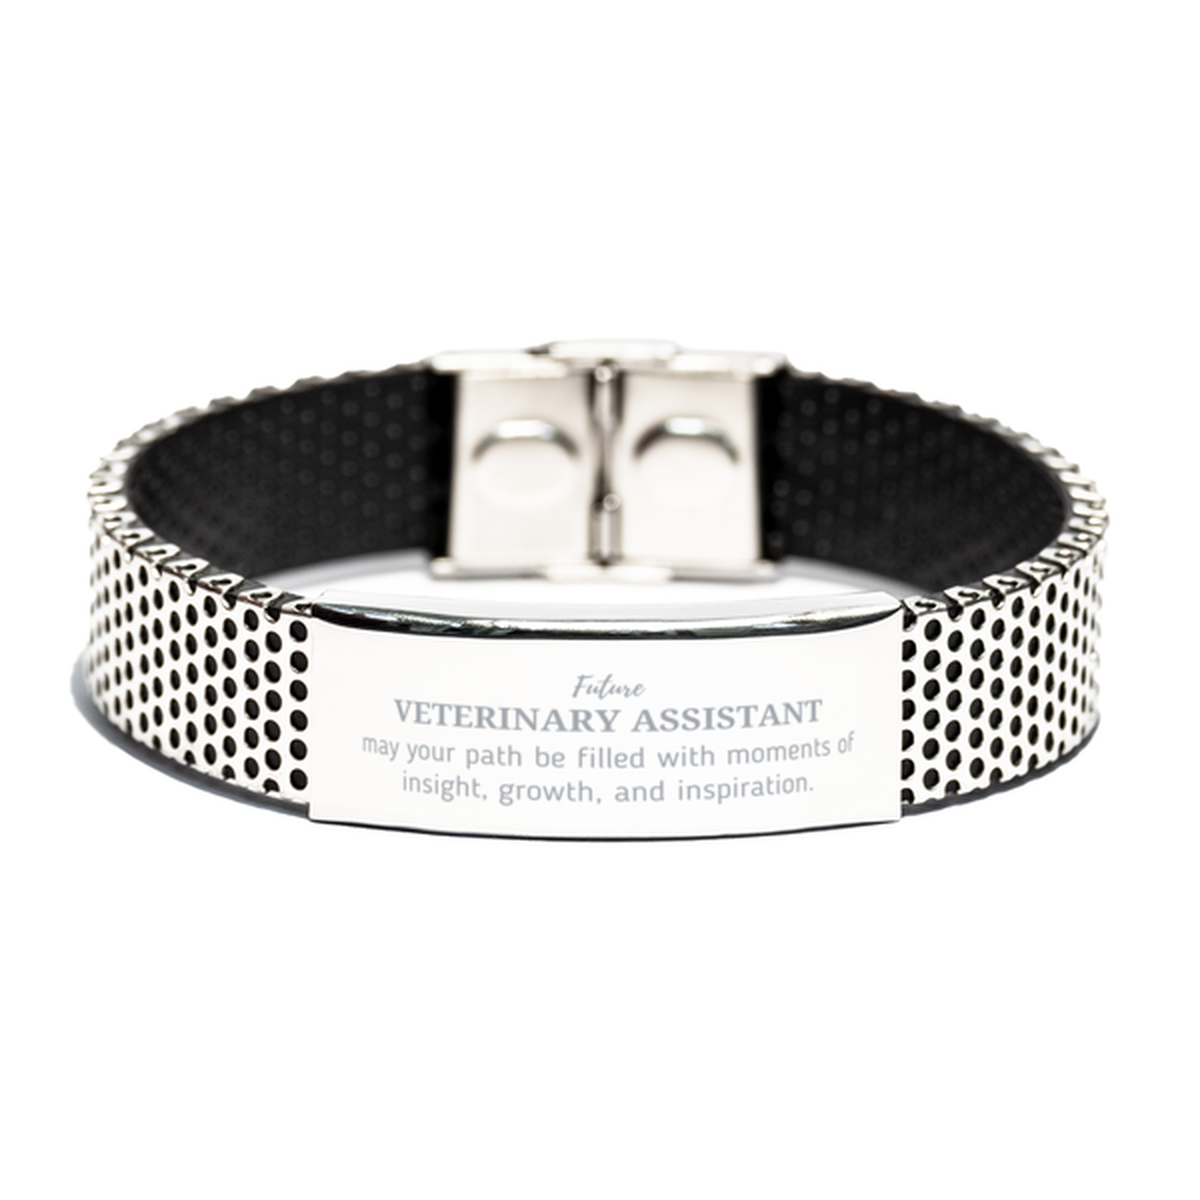 Future Veterinary Assistant Gifts, May your path be filled with moments of insight, Graduation Gifts for New Veterinary Assistant, Christmas Unique Stainless Steel Bracelet For Men, Women, Friends